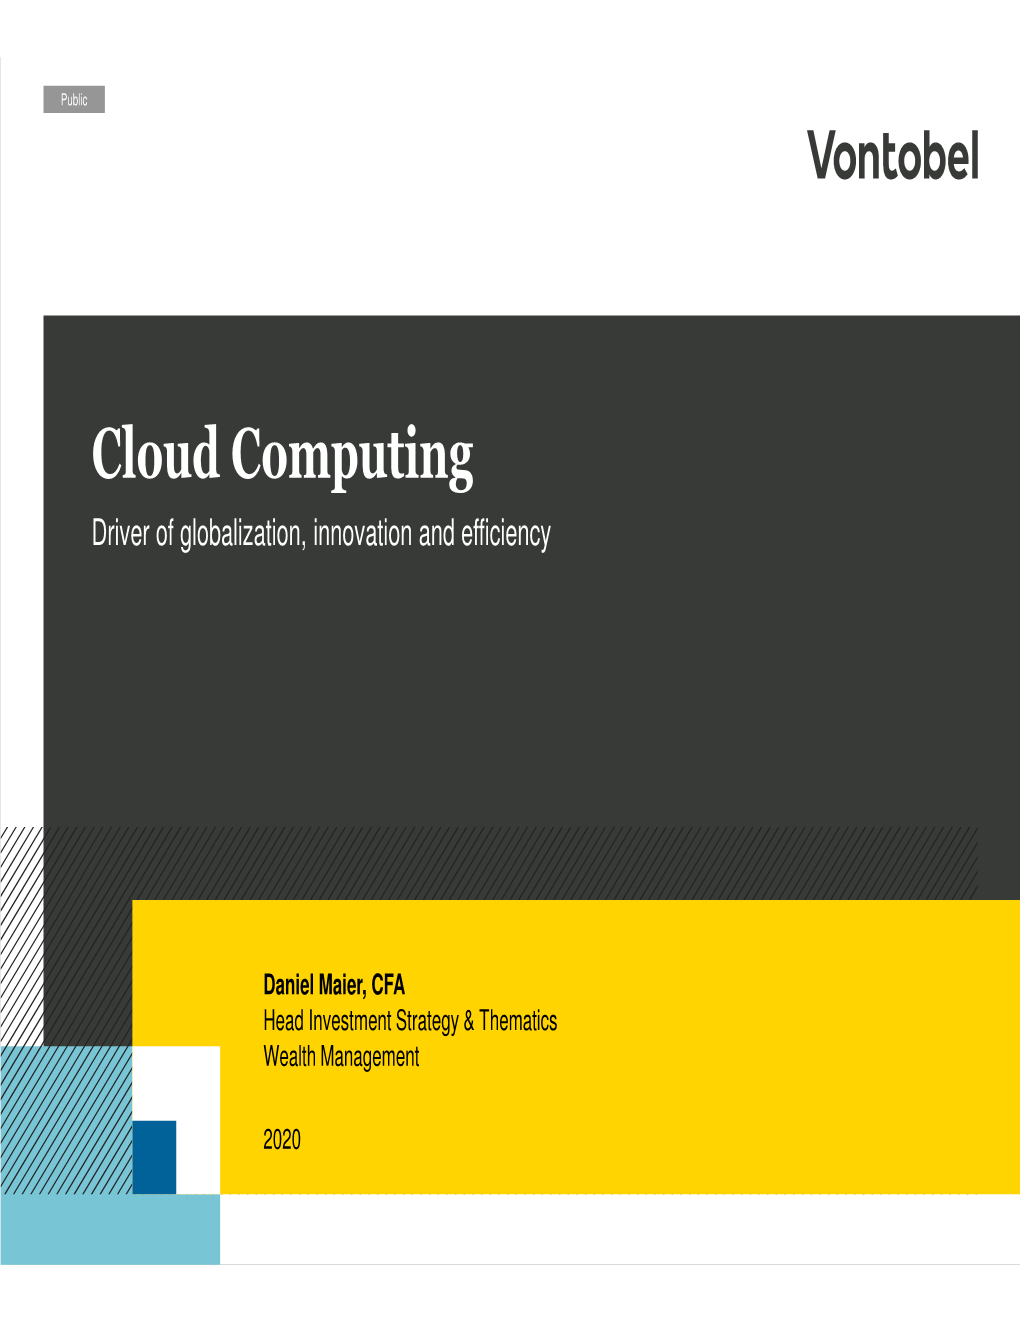 Cloud Computing Driver of Globalization, Innovation and Efficiency